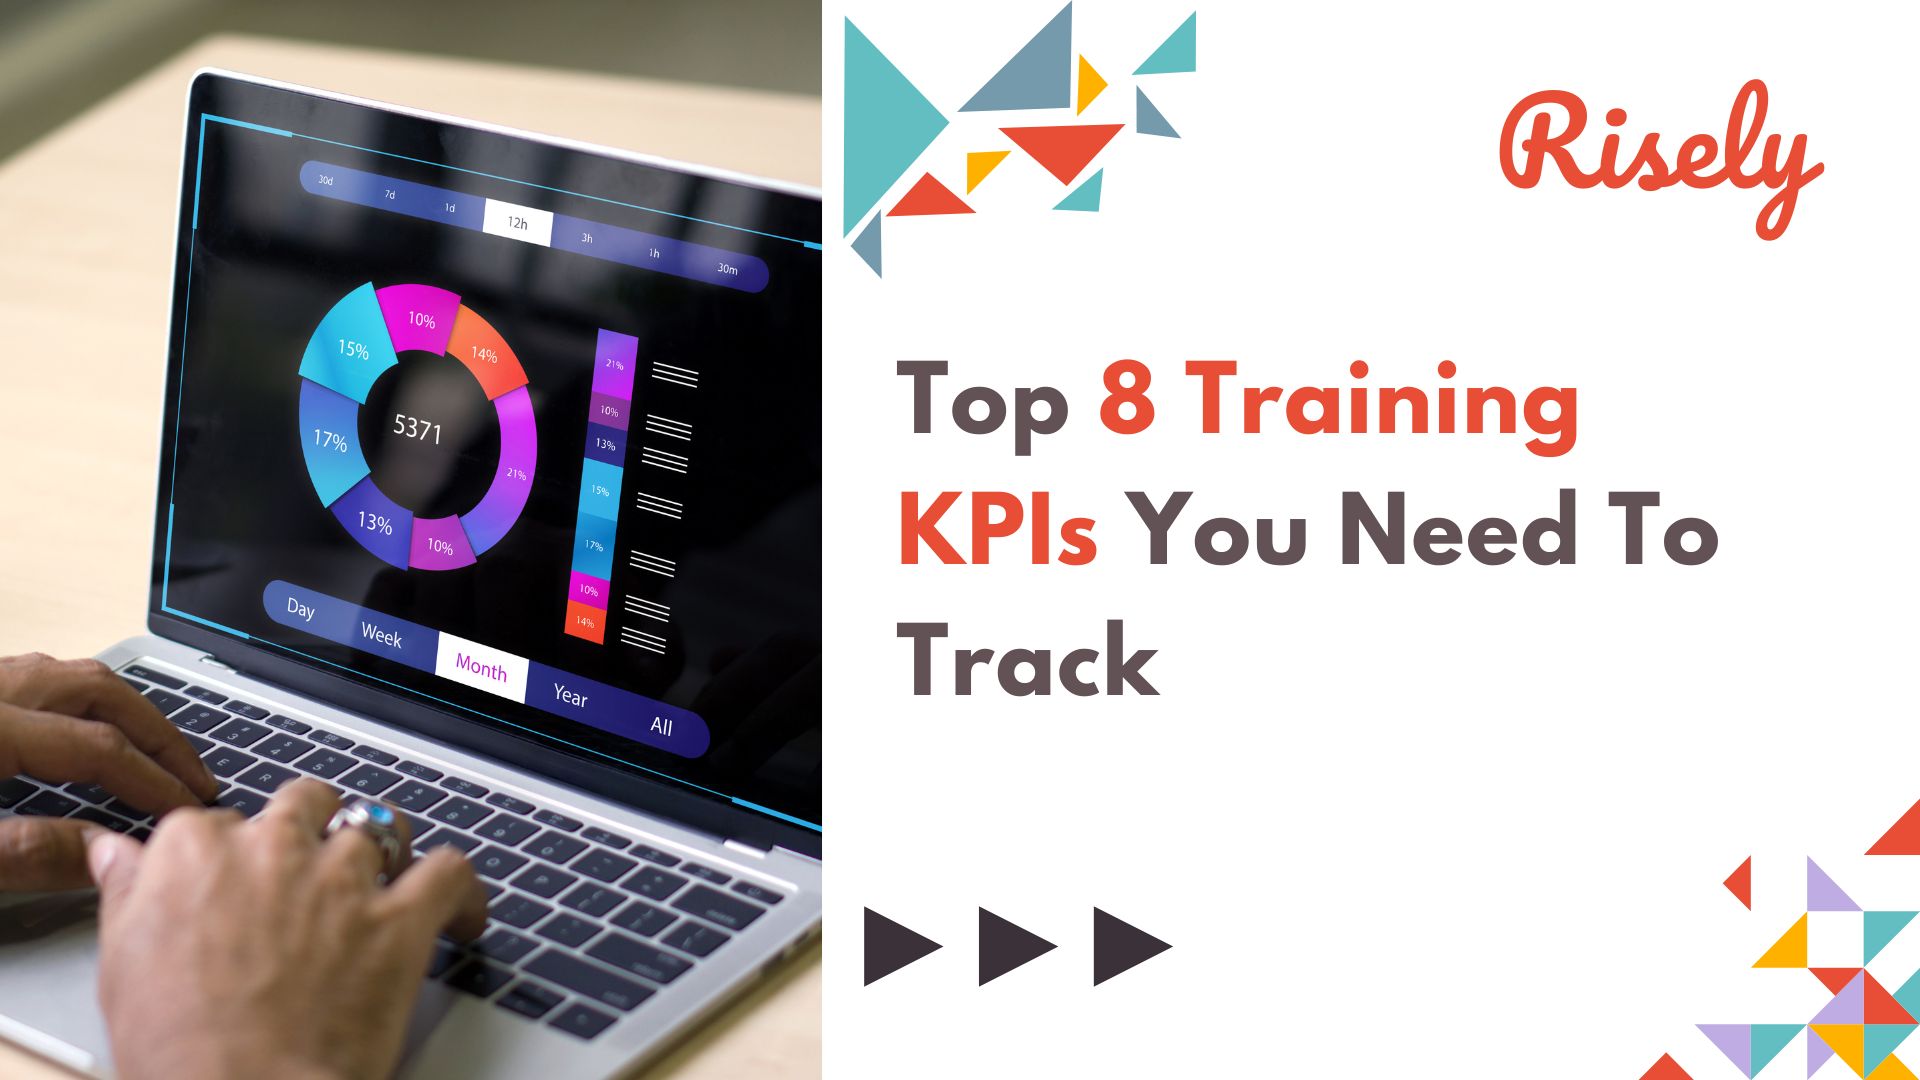 Top 8 Training KPIs You Need To Track